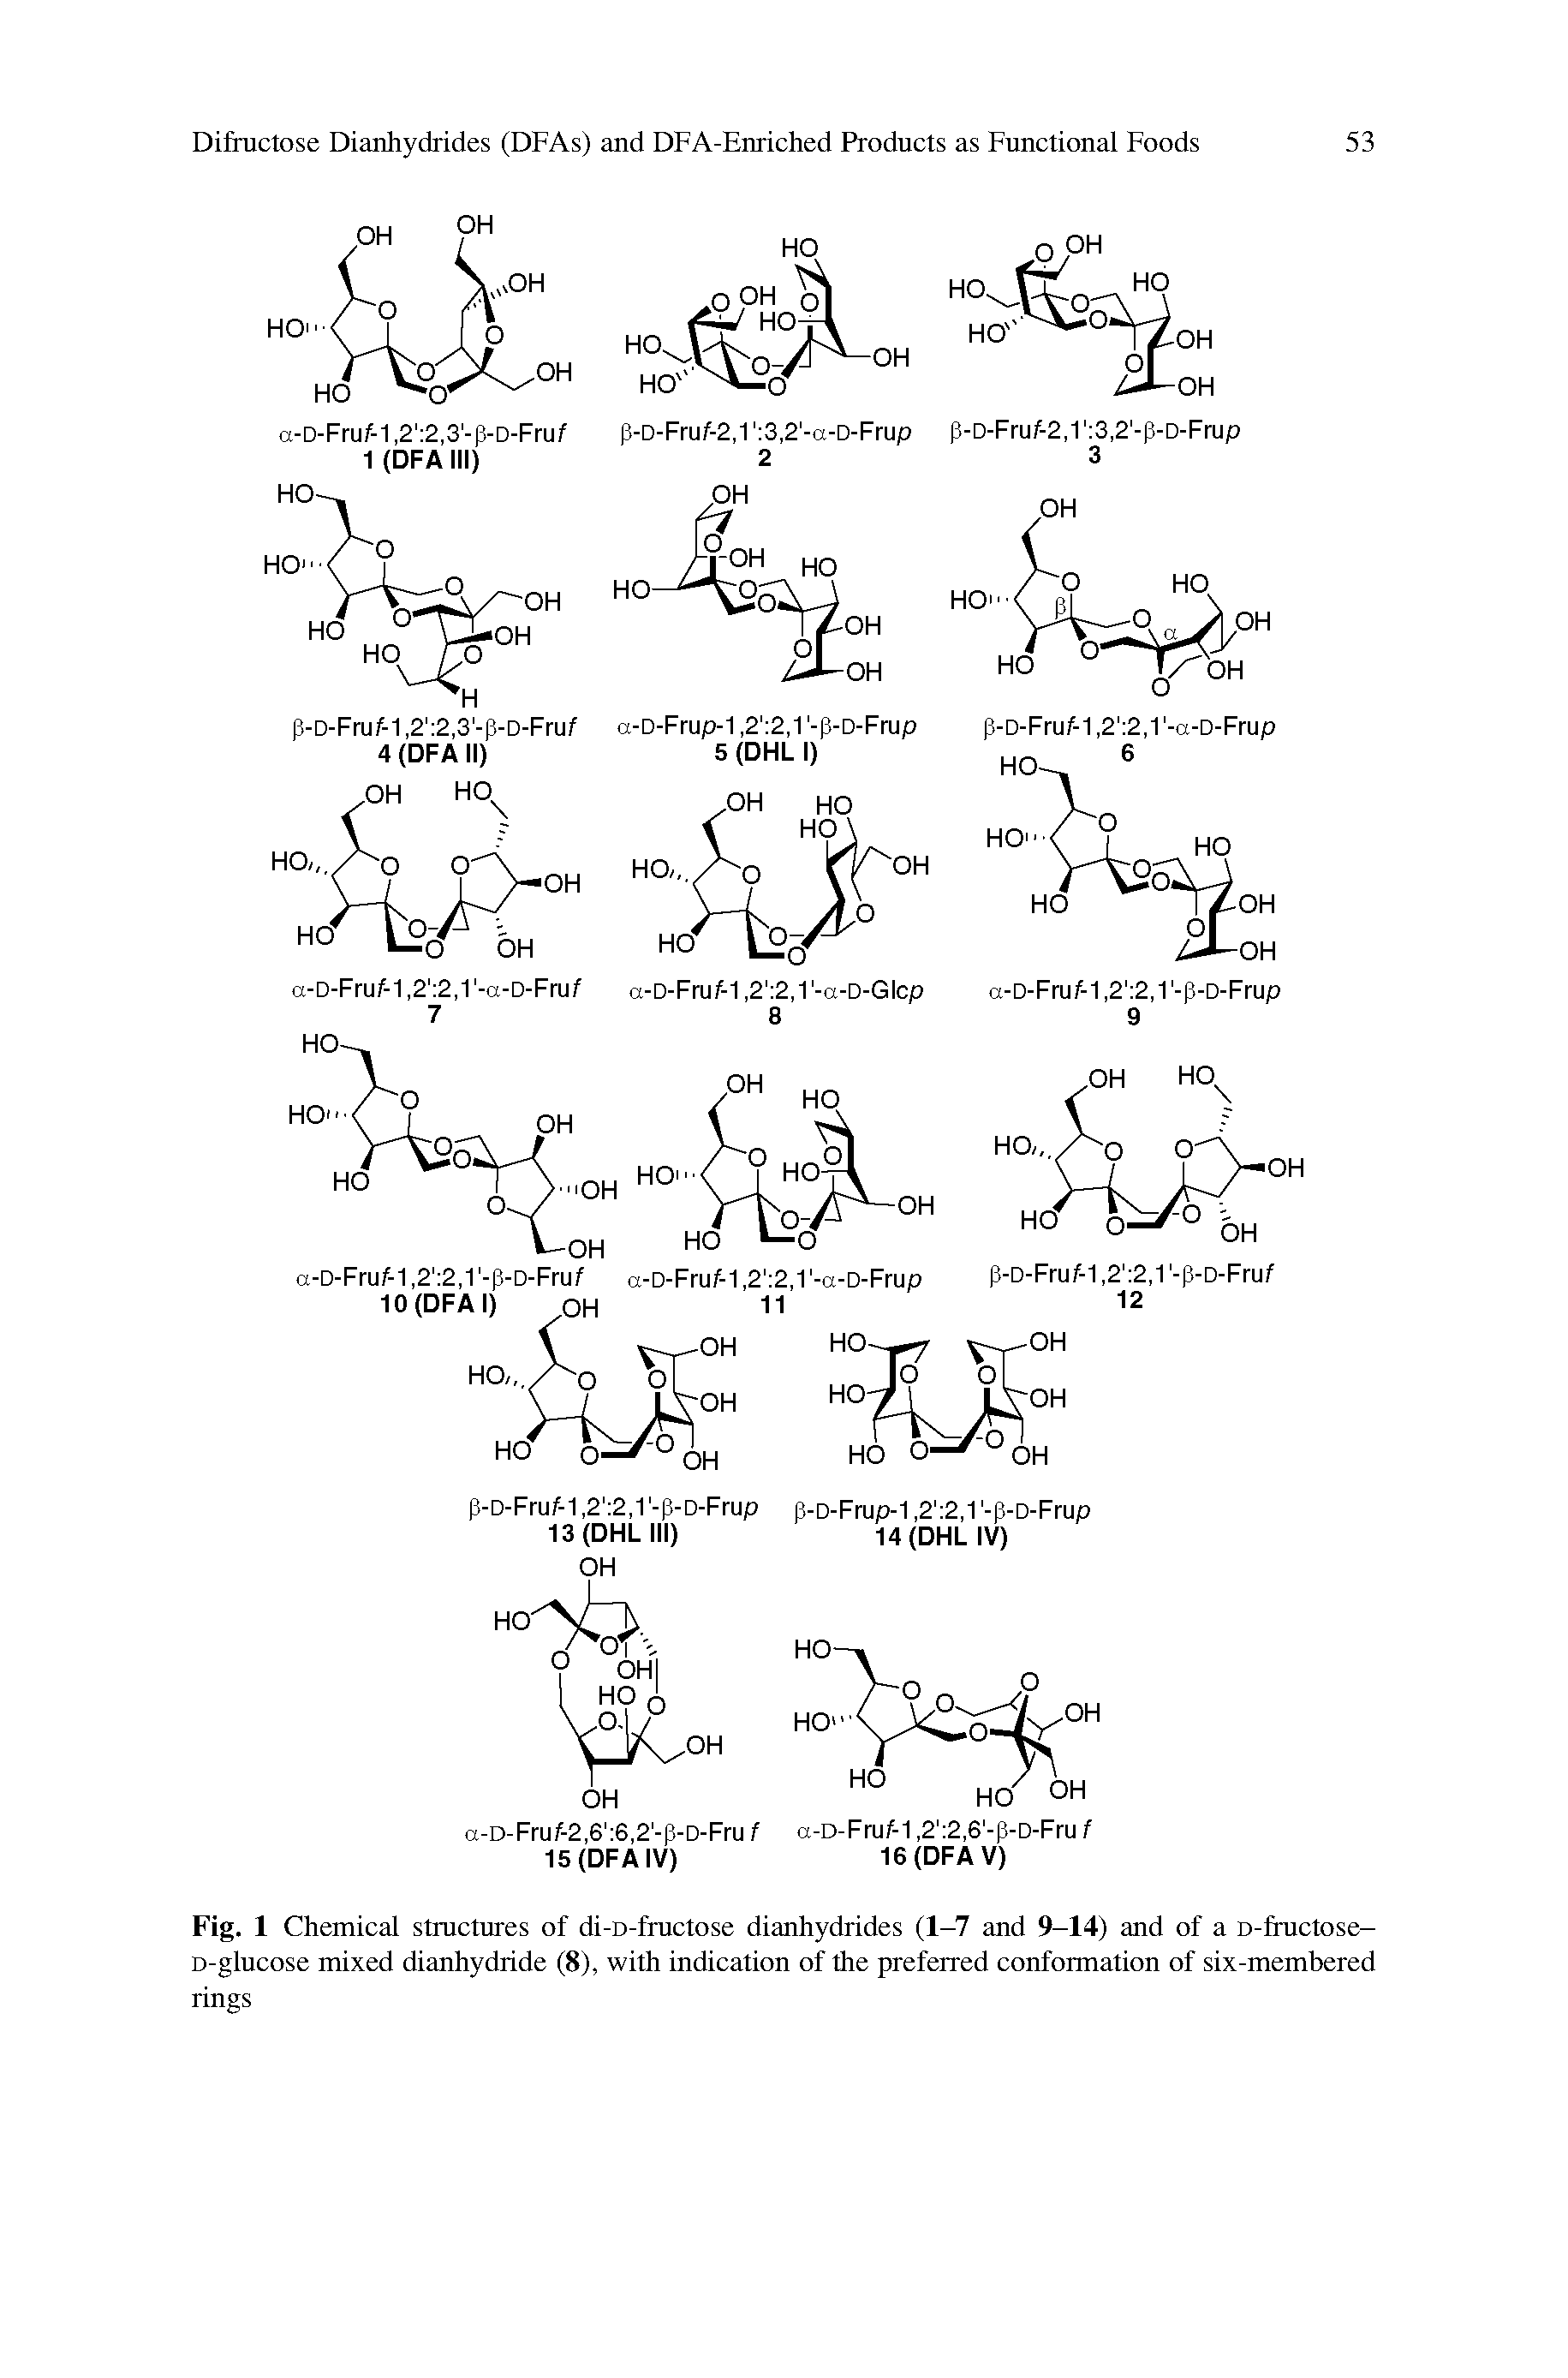 Fig. 1 Chemical structures of di-D-fructose dianhydrides (1-7 and 9-14) and of a D-fructose-D-glucose mixed dianhydride (8), with indication of the preferred conformation of six-membered rings...